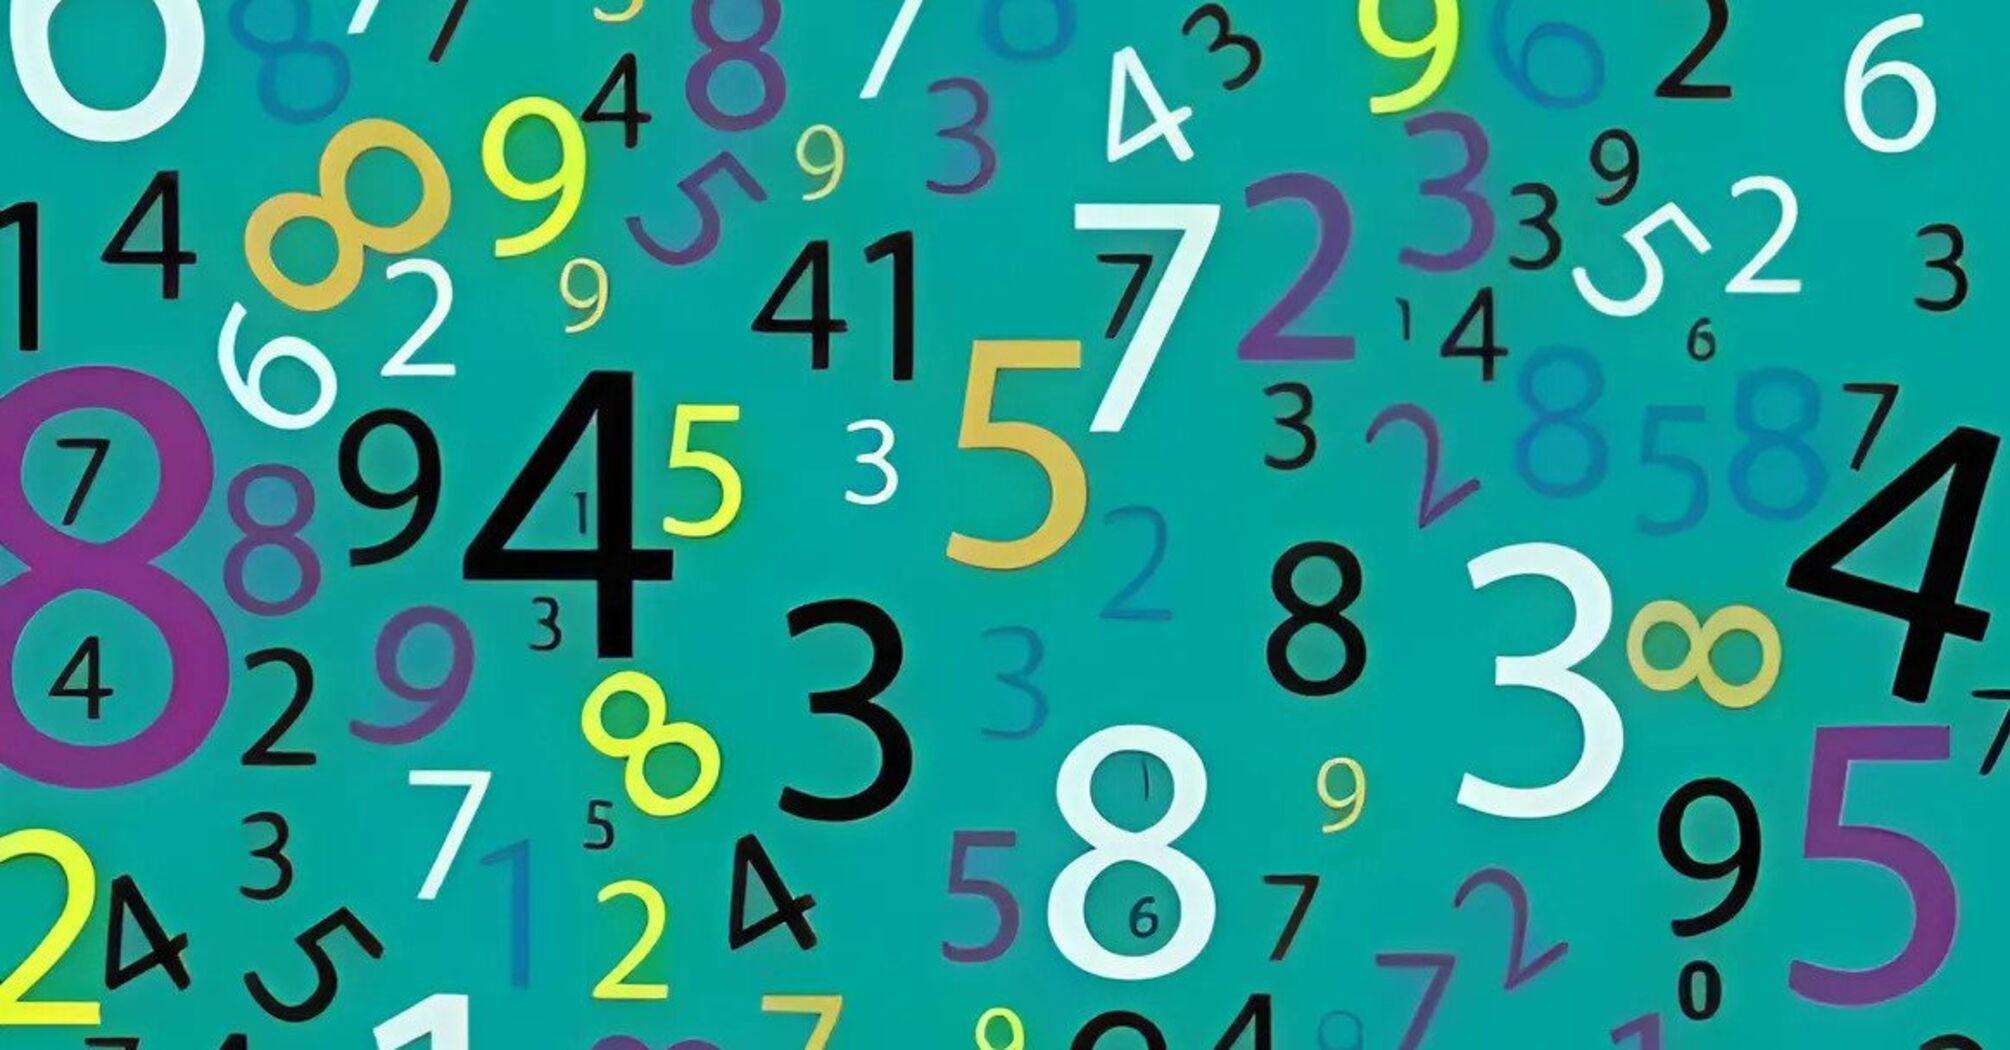 Puzzle for the smartest: test yourself and try to find the hidden number